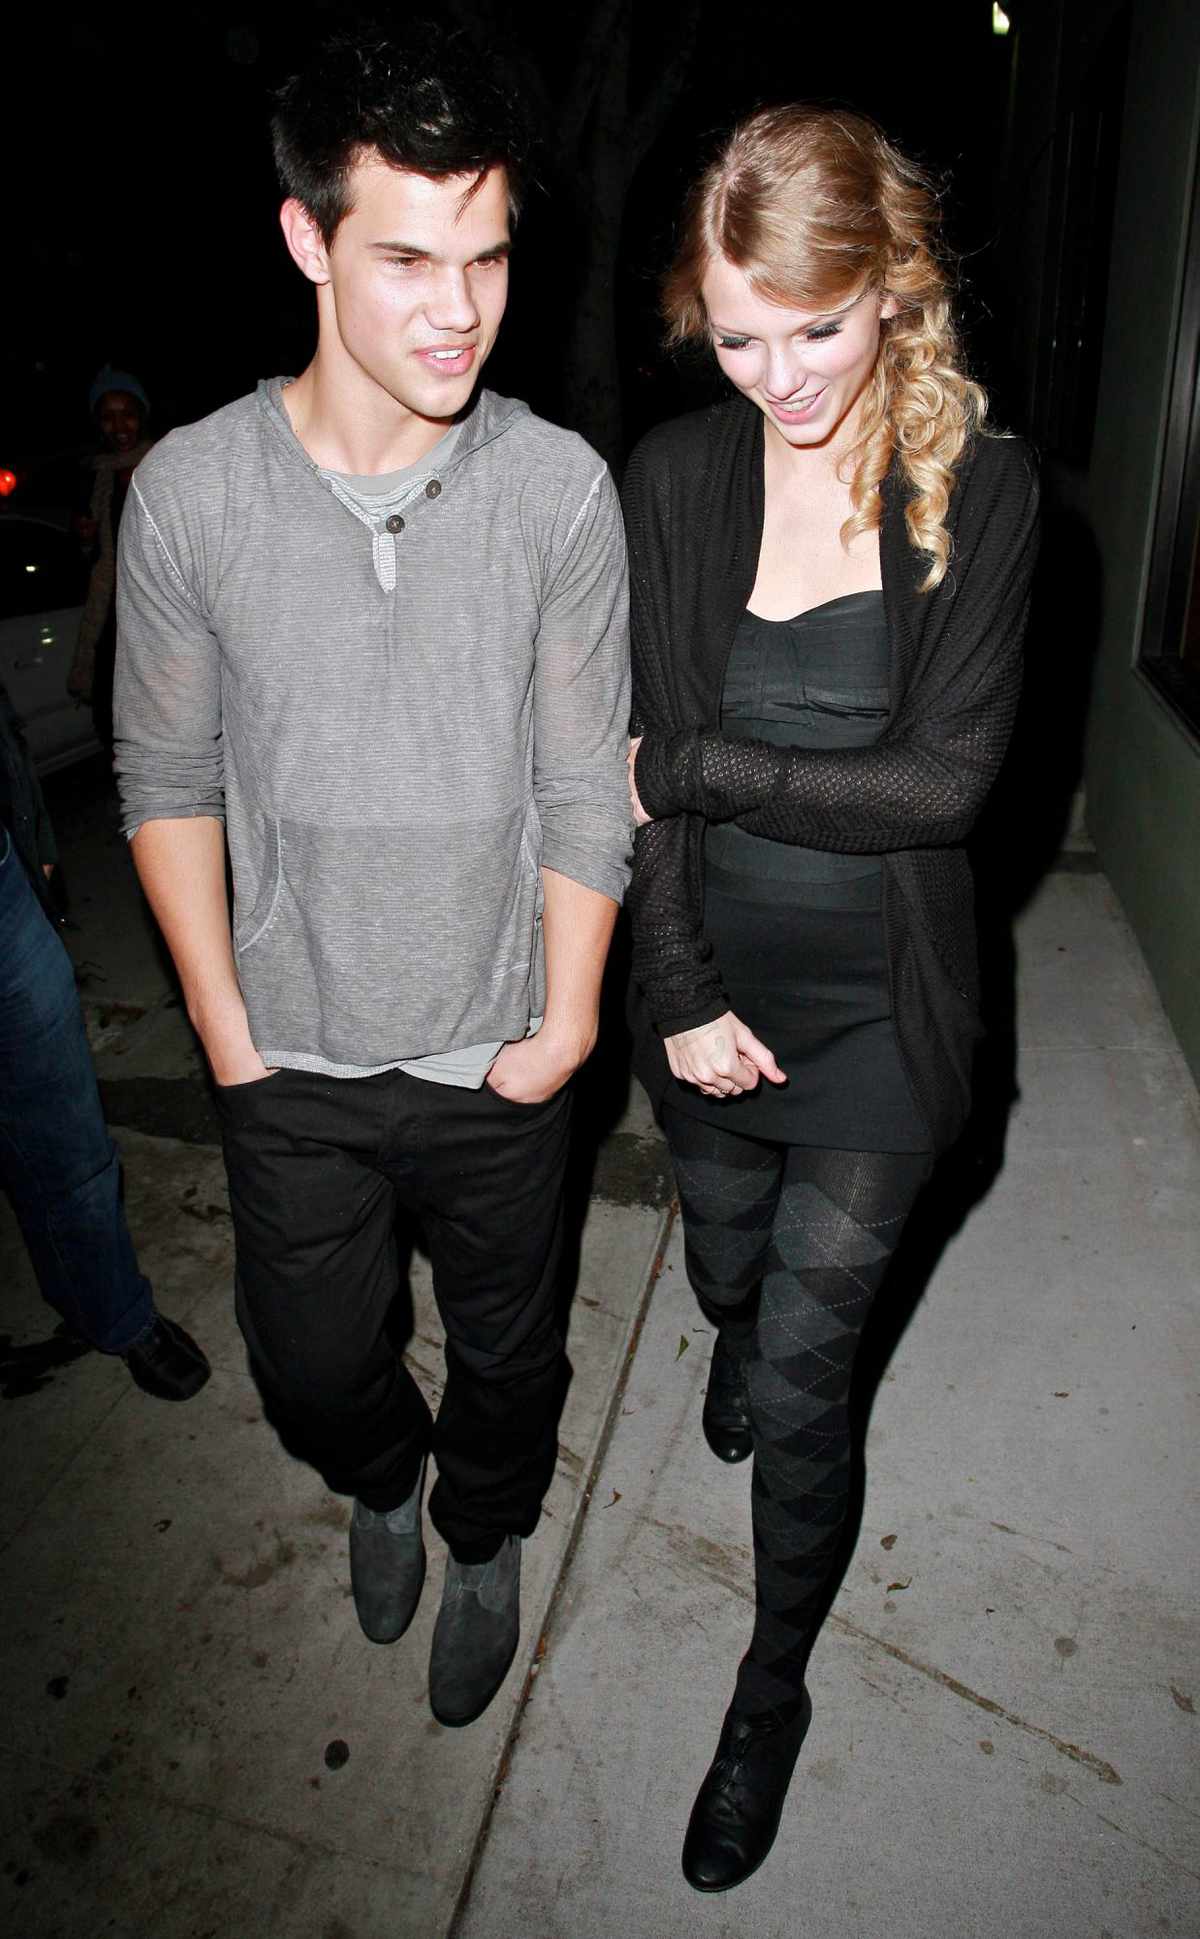 Taylor lautner dating now